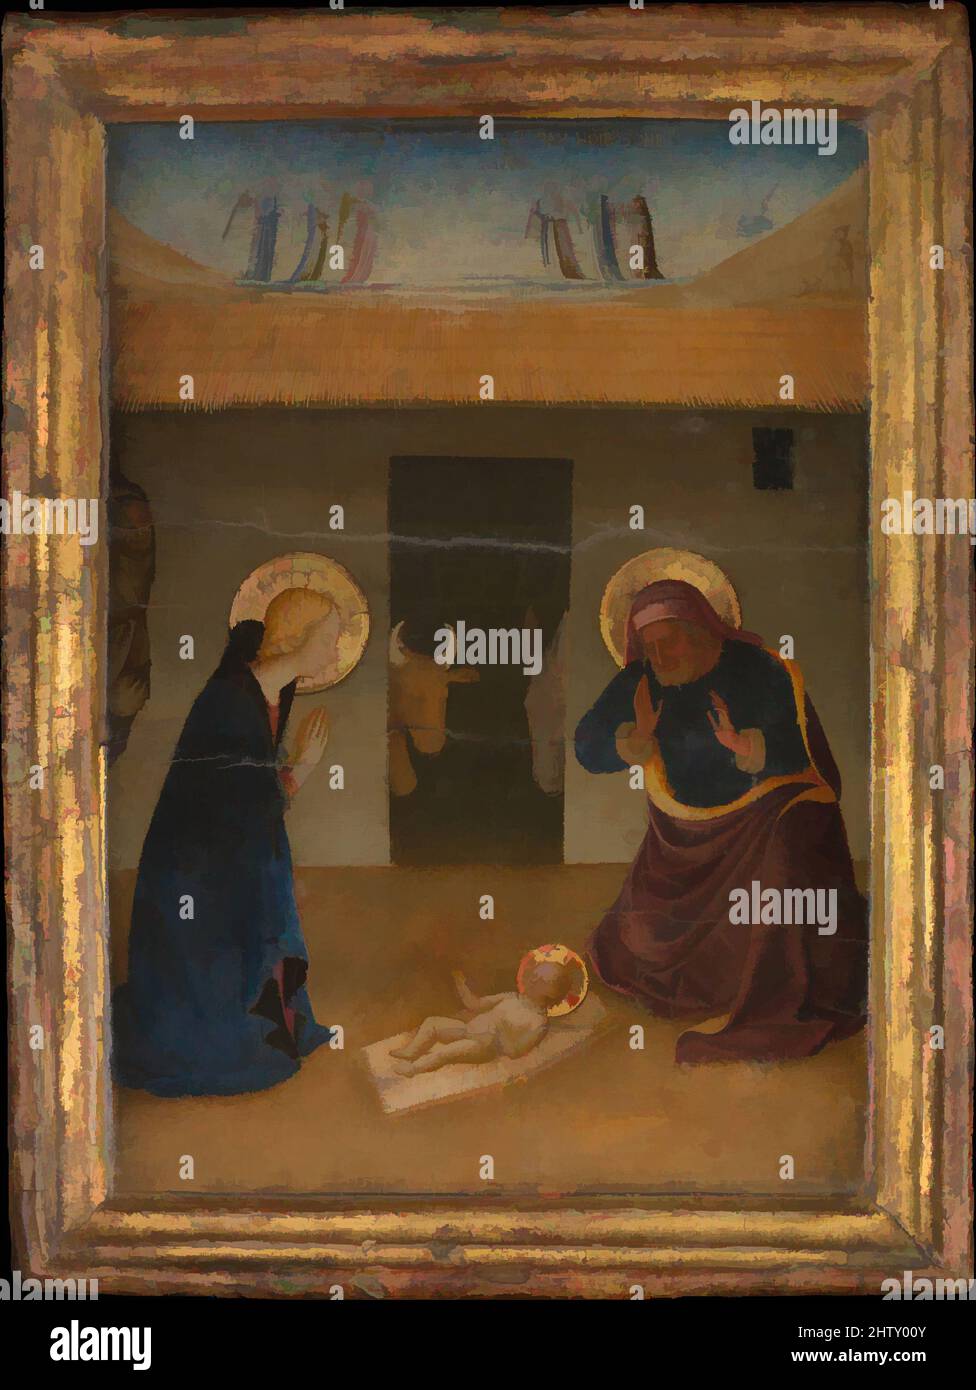 Art inspired by The Nativity, Tempera and gold on wood, Overall, with engaged frame, 15 1/4 x 11 1/2 in. (38.7 x 29.2 cm); painted surface 13 x 9 1/8 in. (33 x 23.2 cm), Paintings, Zanobi Strozzi (Italian, Florence 1412–1468 Florence), Although long ascribed to Fra Angelico, this, Classic works modernized by Artotop with a splash of modernity. Shapes, color and value, eye-catching visual impact on art. Emotions through freedom of artworks in a contemporary way. A timeless message pursuing a wildly creative new direction. Artists turning to the digital medium and creating the Artotop NFT Stock Photo